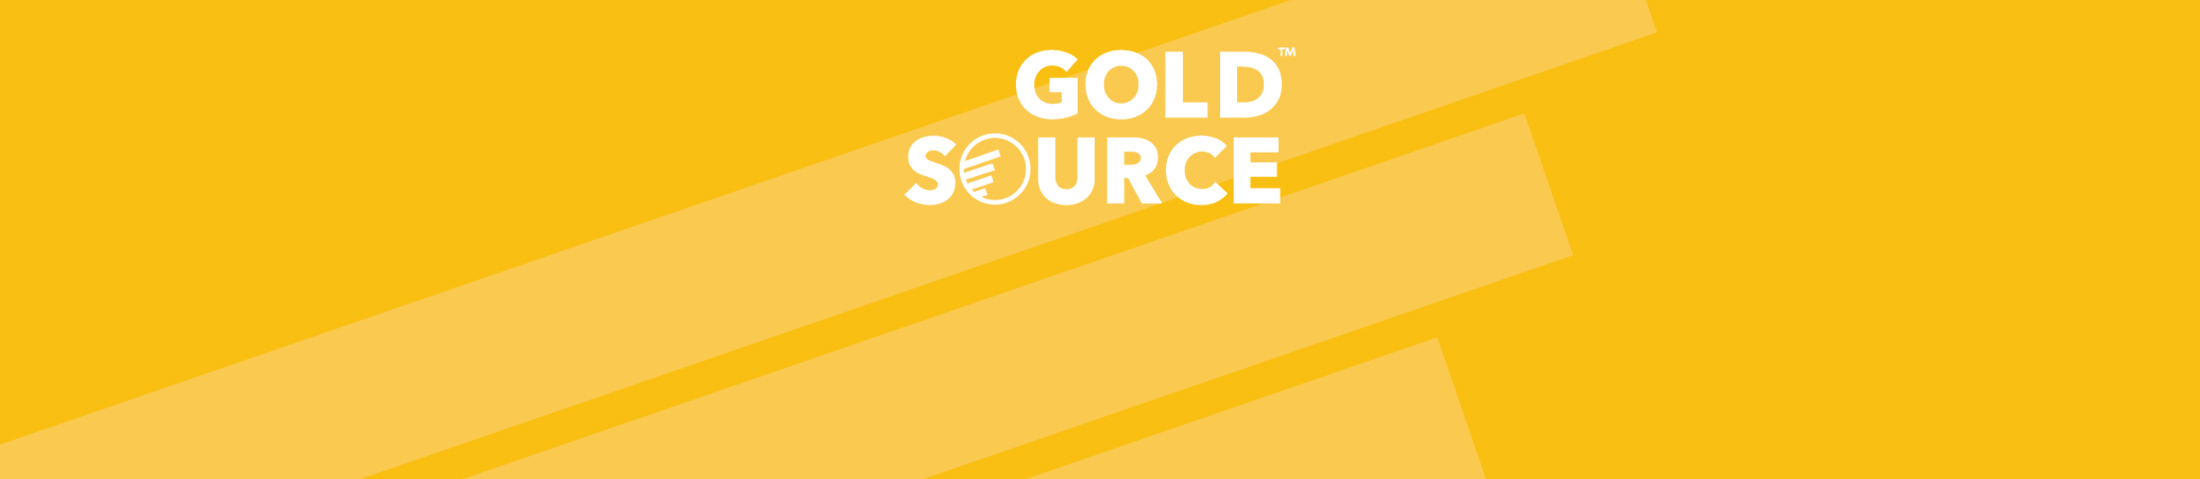 Gold Source Seeds for Agricultural Production